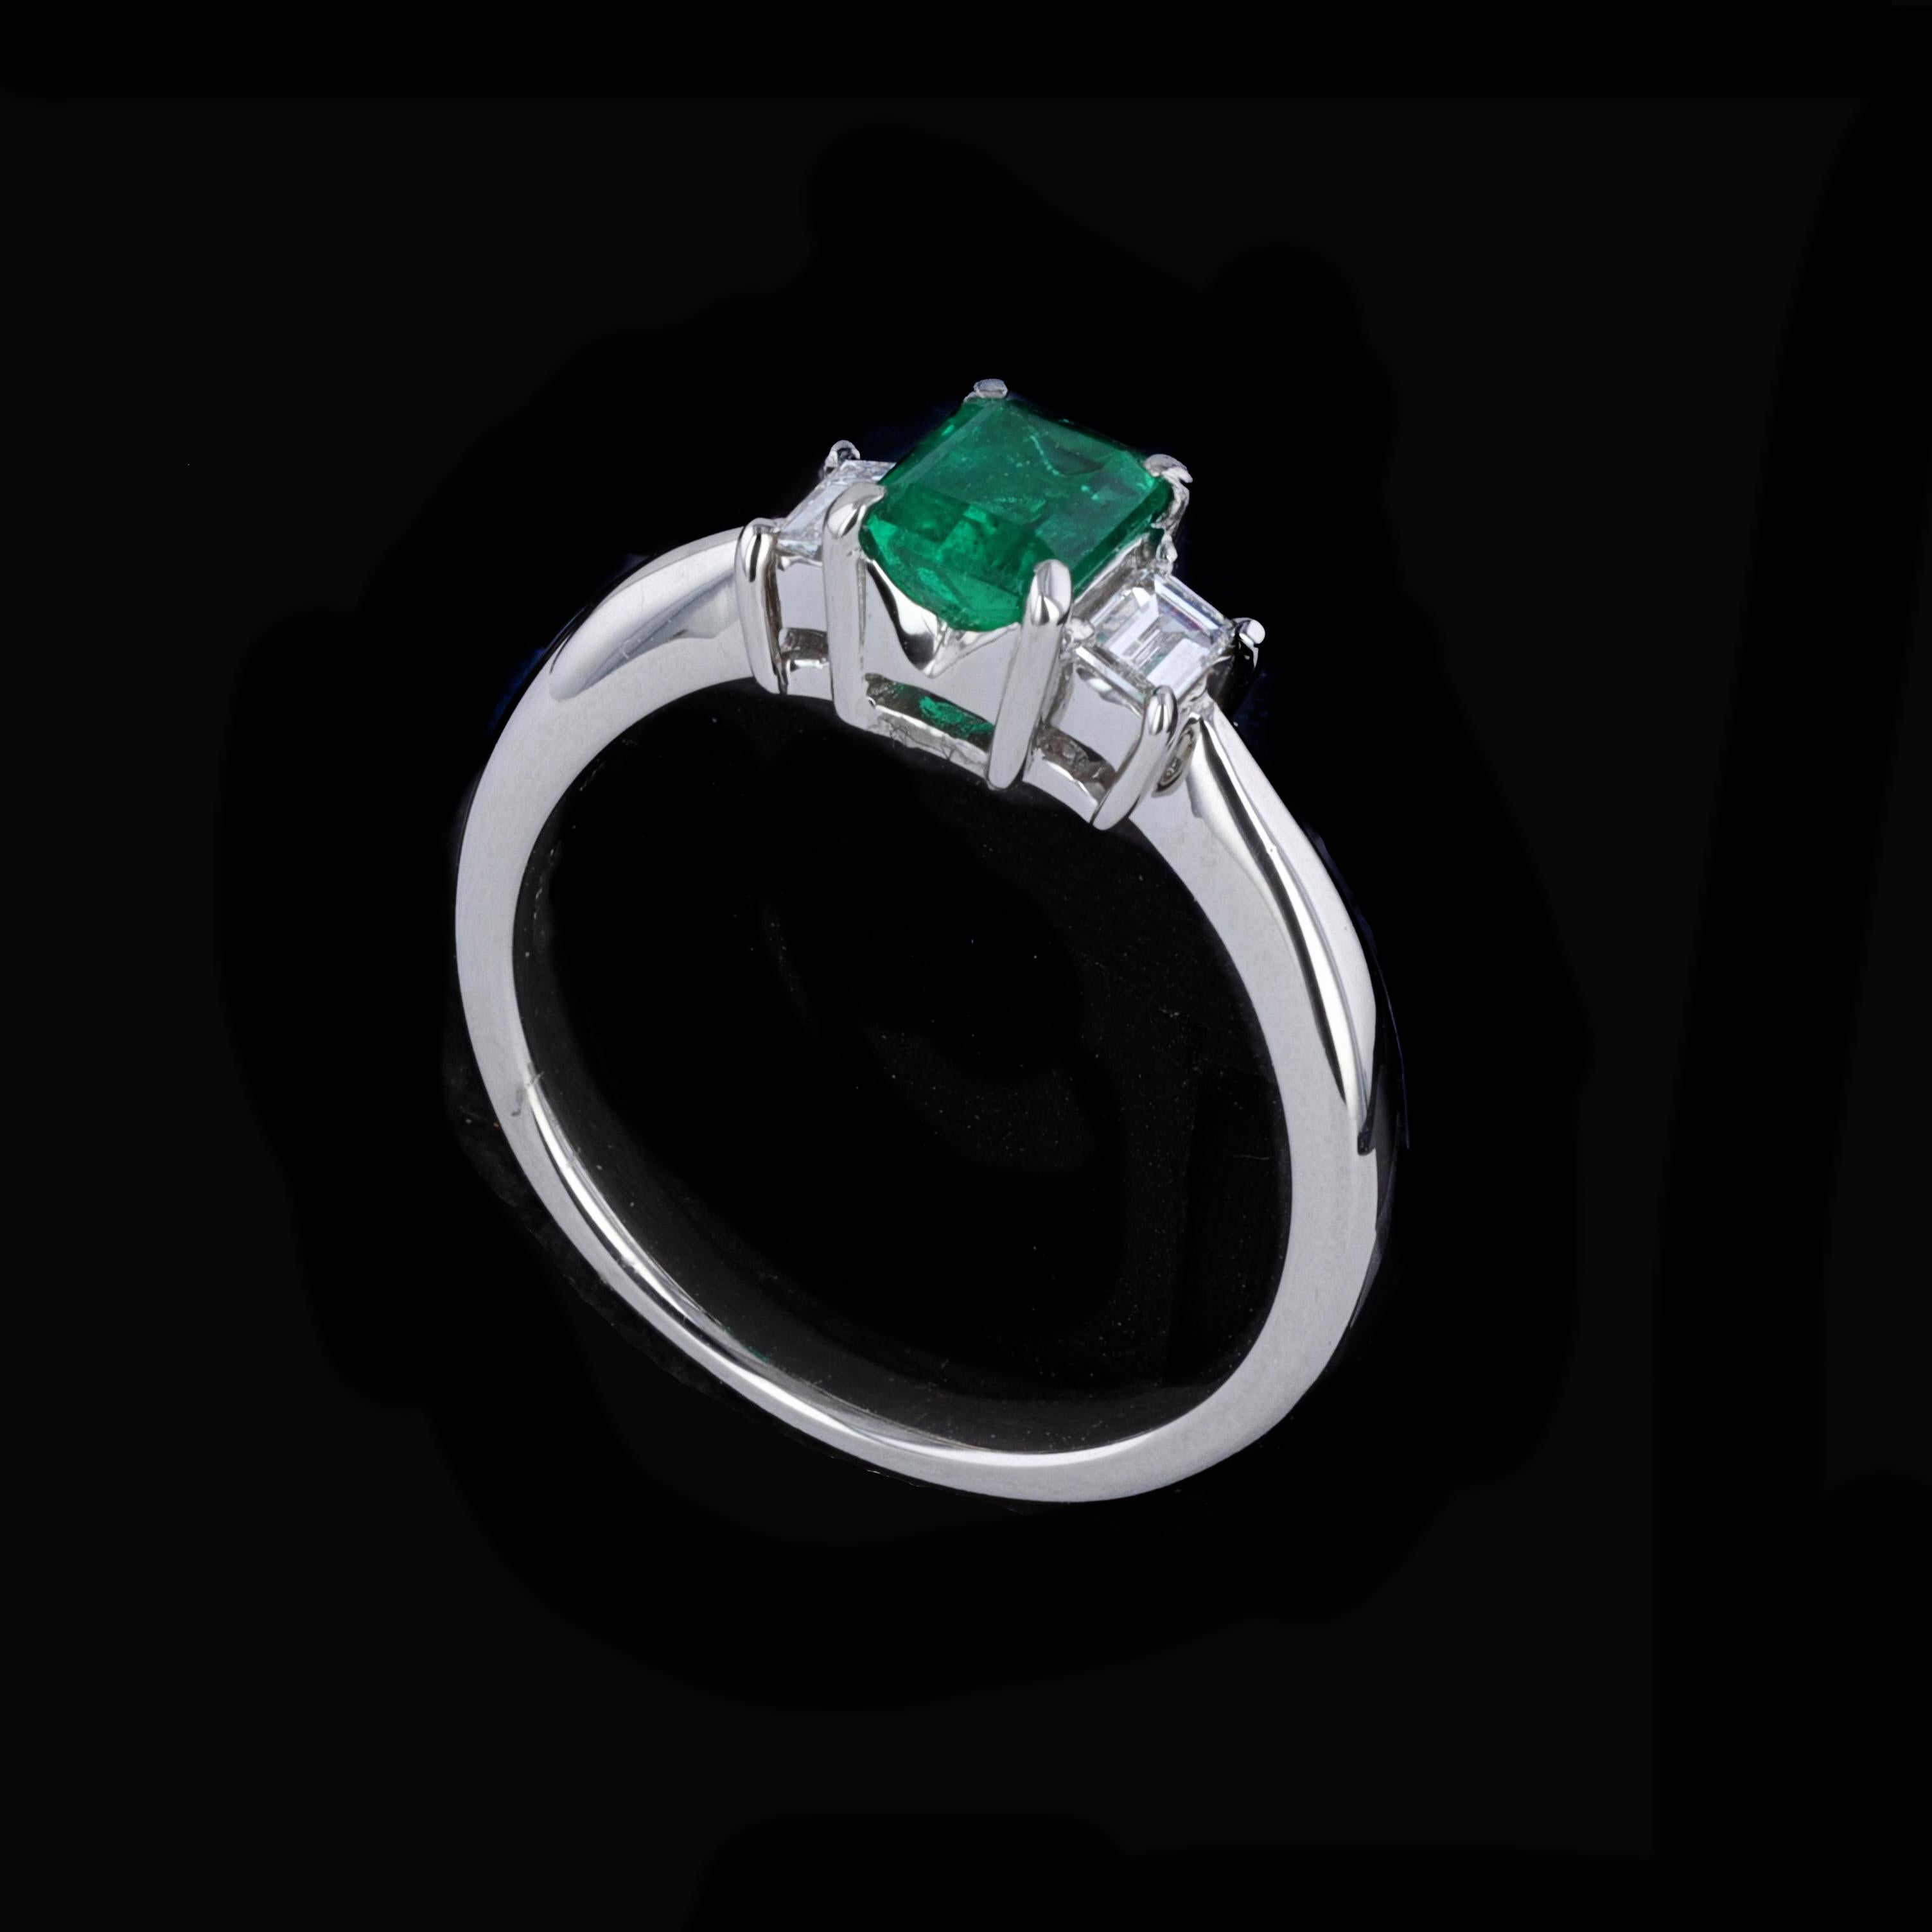 Exceptional and elegant 0.58ct Emerald 0.18ct Diamond Platinum Ring. The ring is centered with emerald cut emerald that weighs approximately 0.58ct. The emerald is accentuated by 2 emerald cut diamonds that weigh approximately 0.18ct. The color of